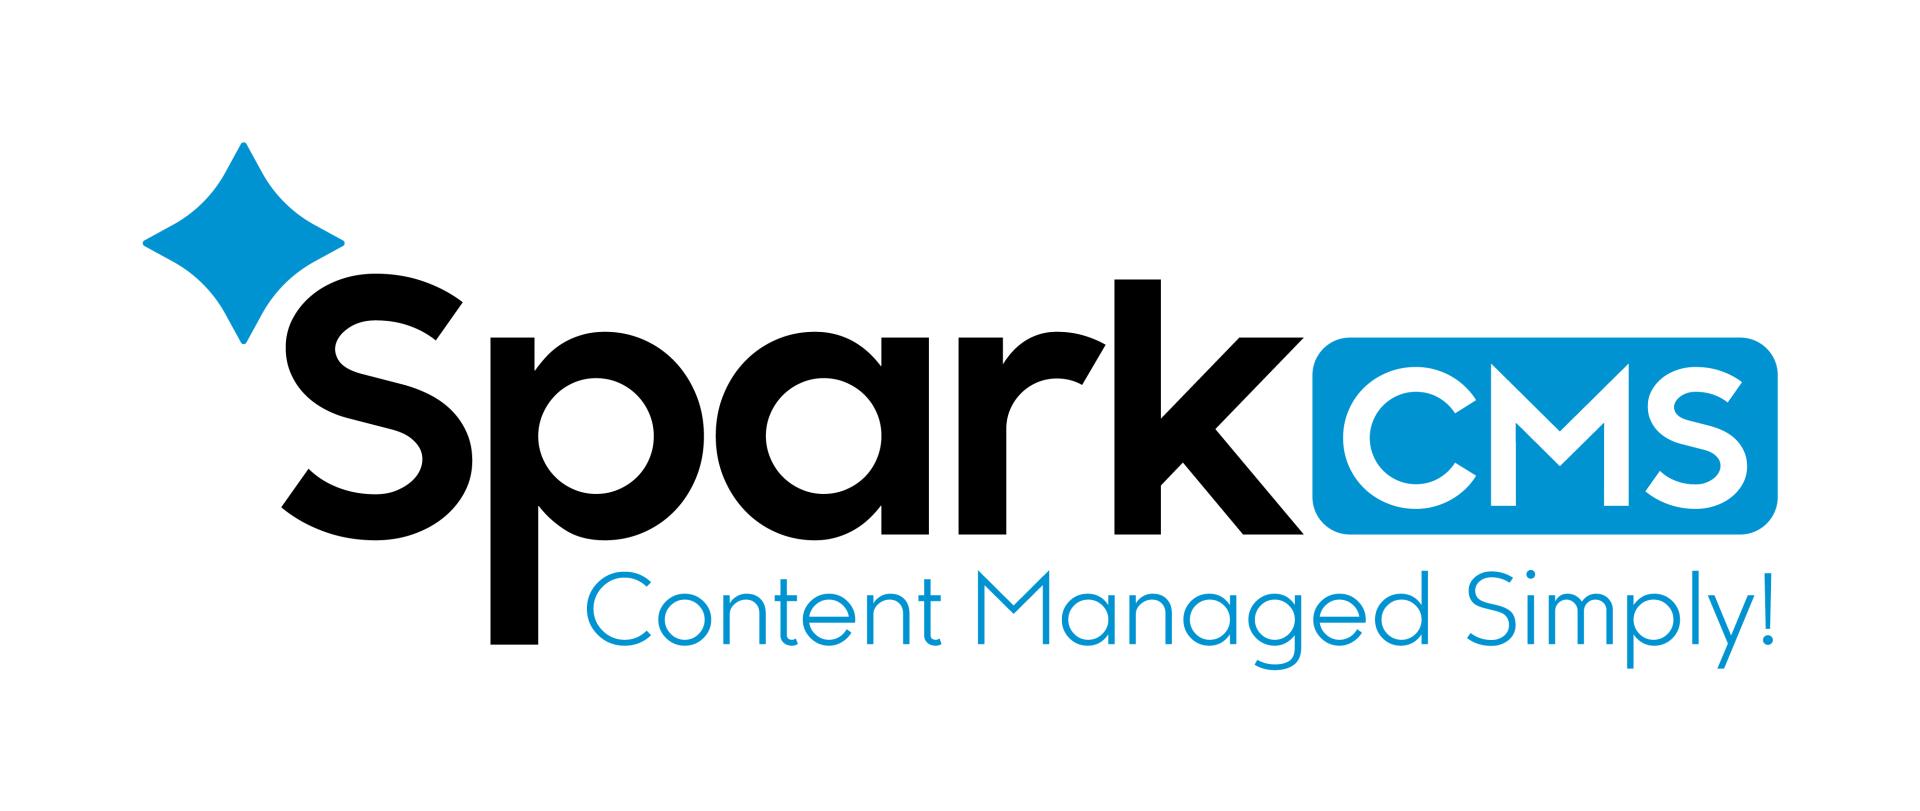 About Spark CMS Image